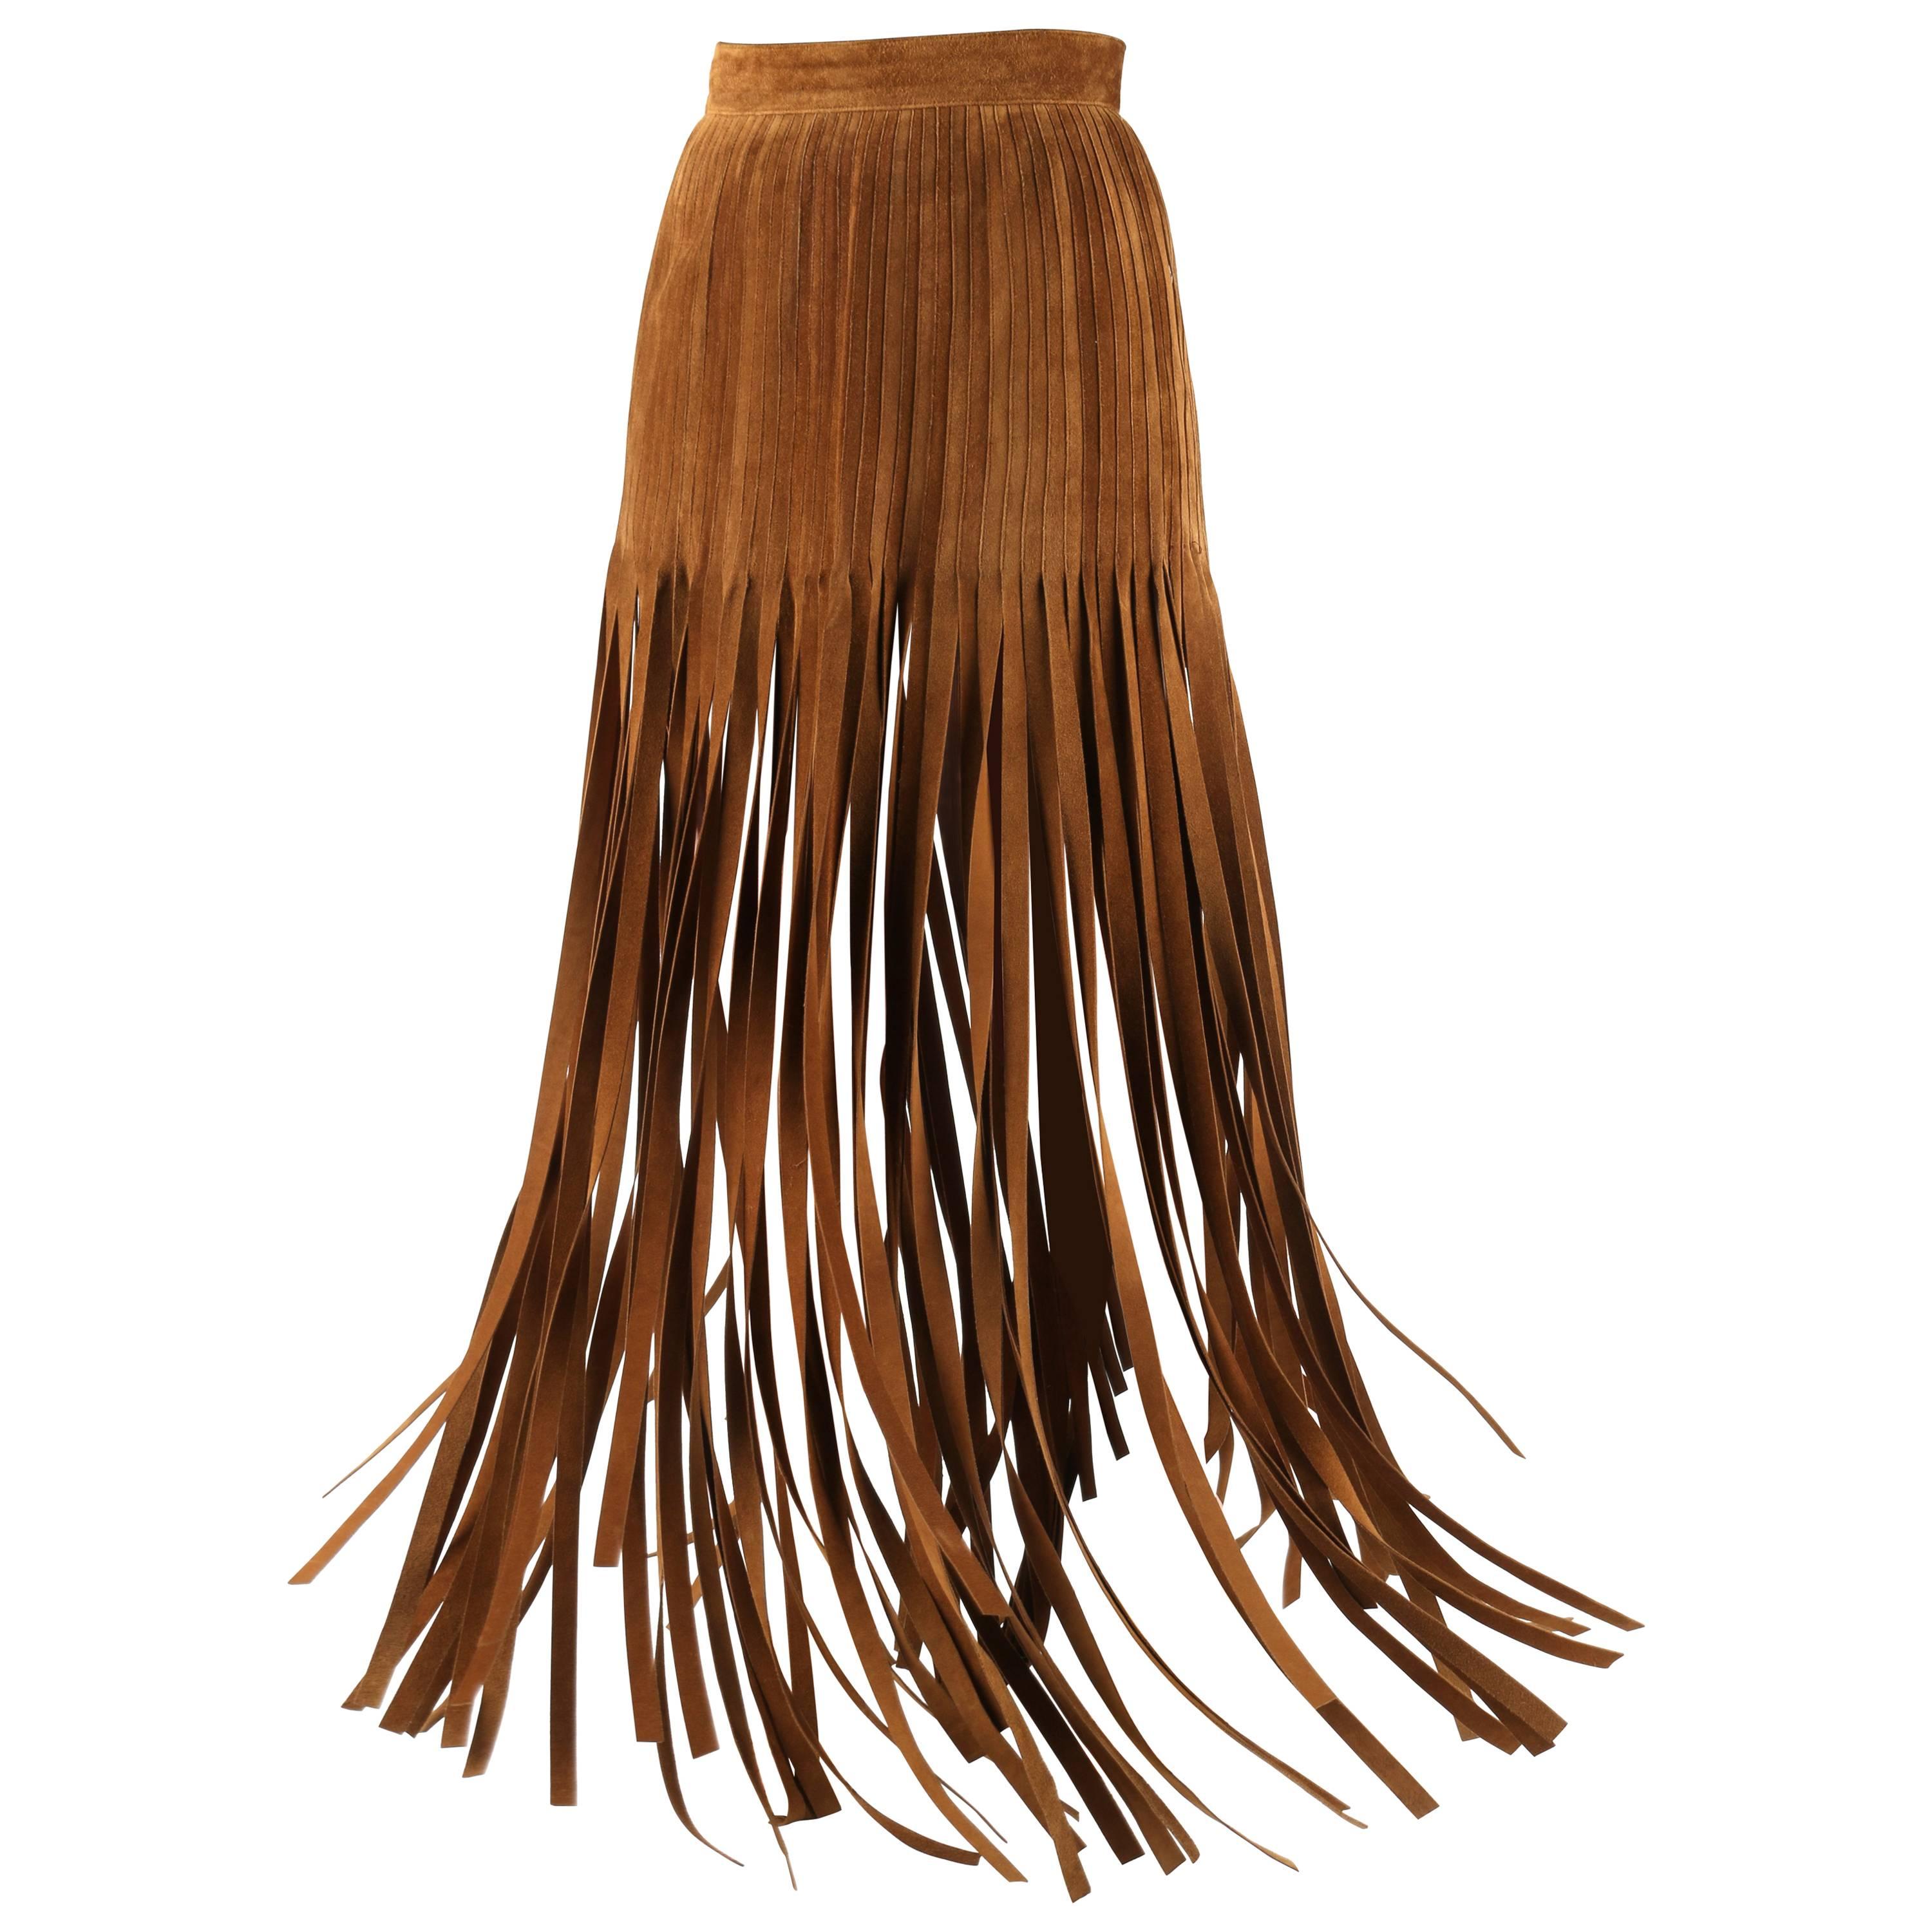 HERMES 1970s Brown Calf Skin Suede Leather Mini Long Maxi Fringe Skirt Size 38